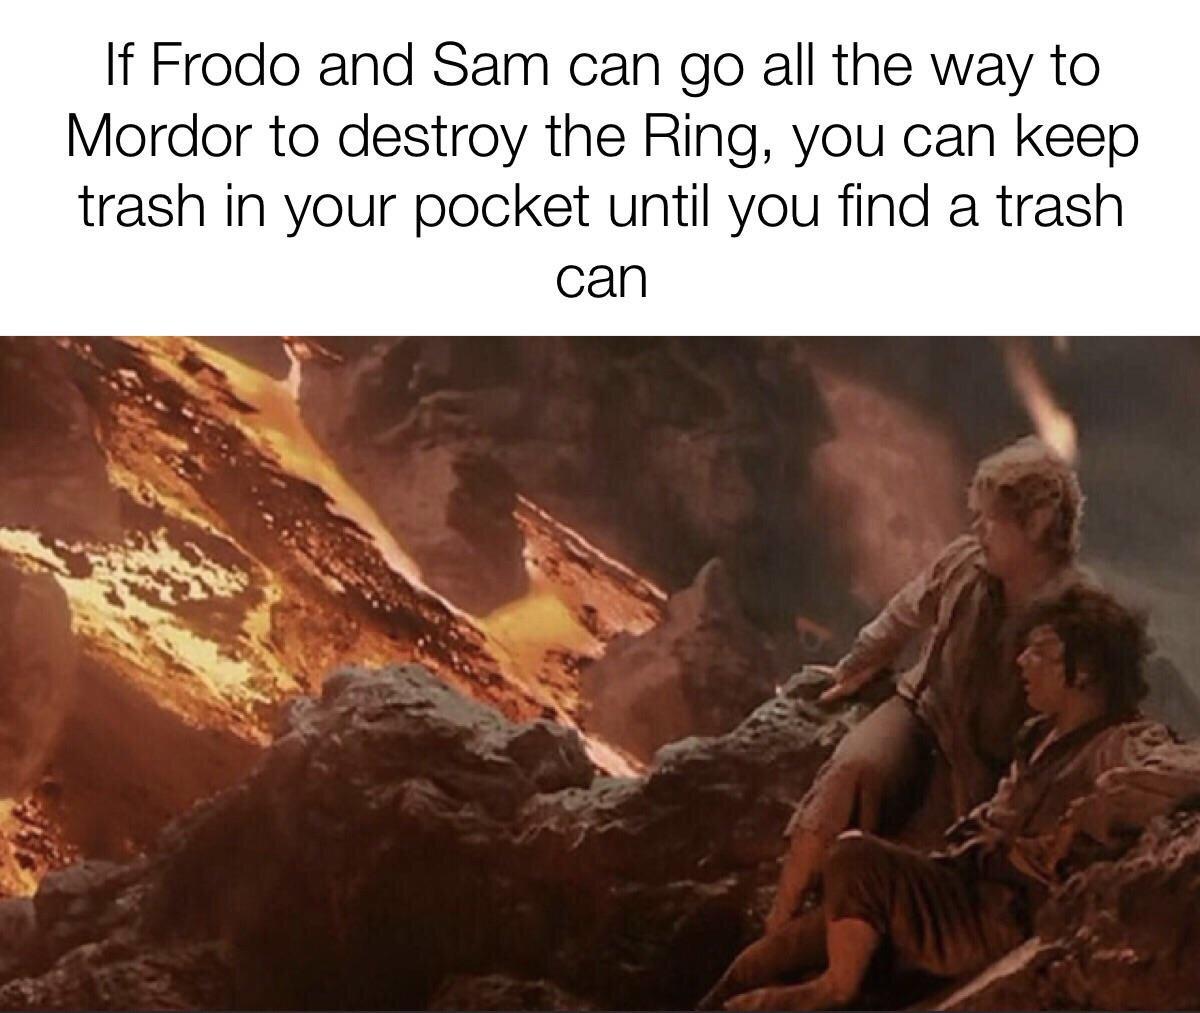 lord of the rings mount doom - If Frodo and Sam can go all the way to Mordor to destroy the Ring, you can keep trash in your pocket until you find a trash can